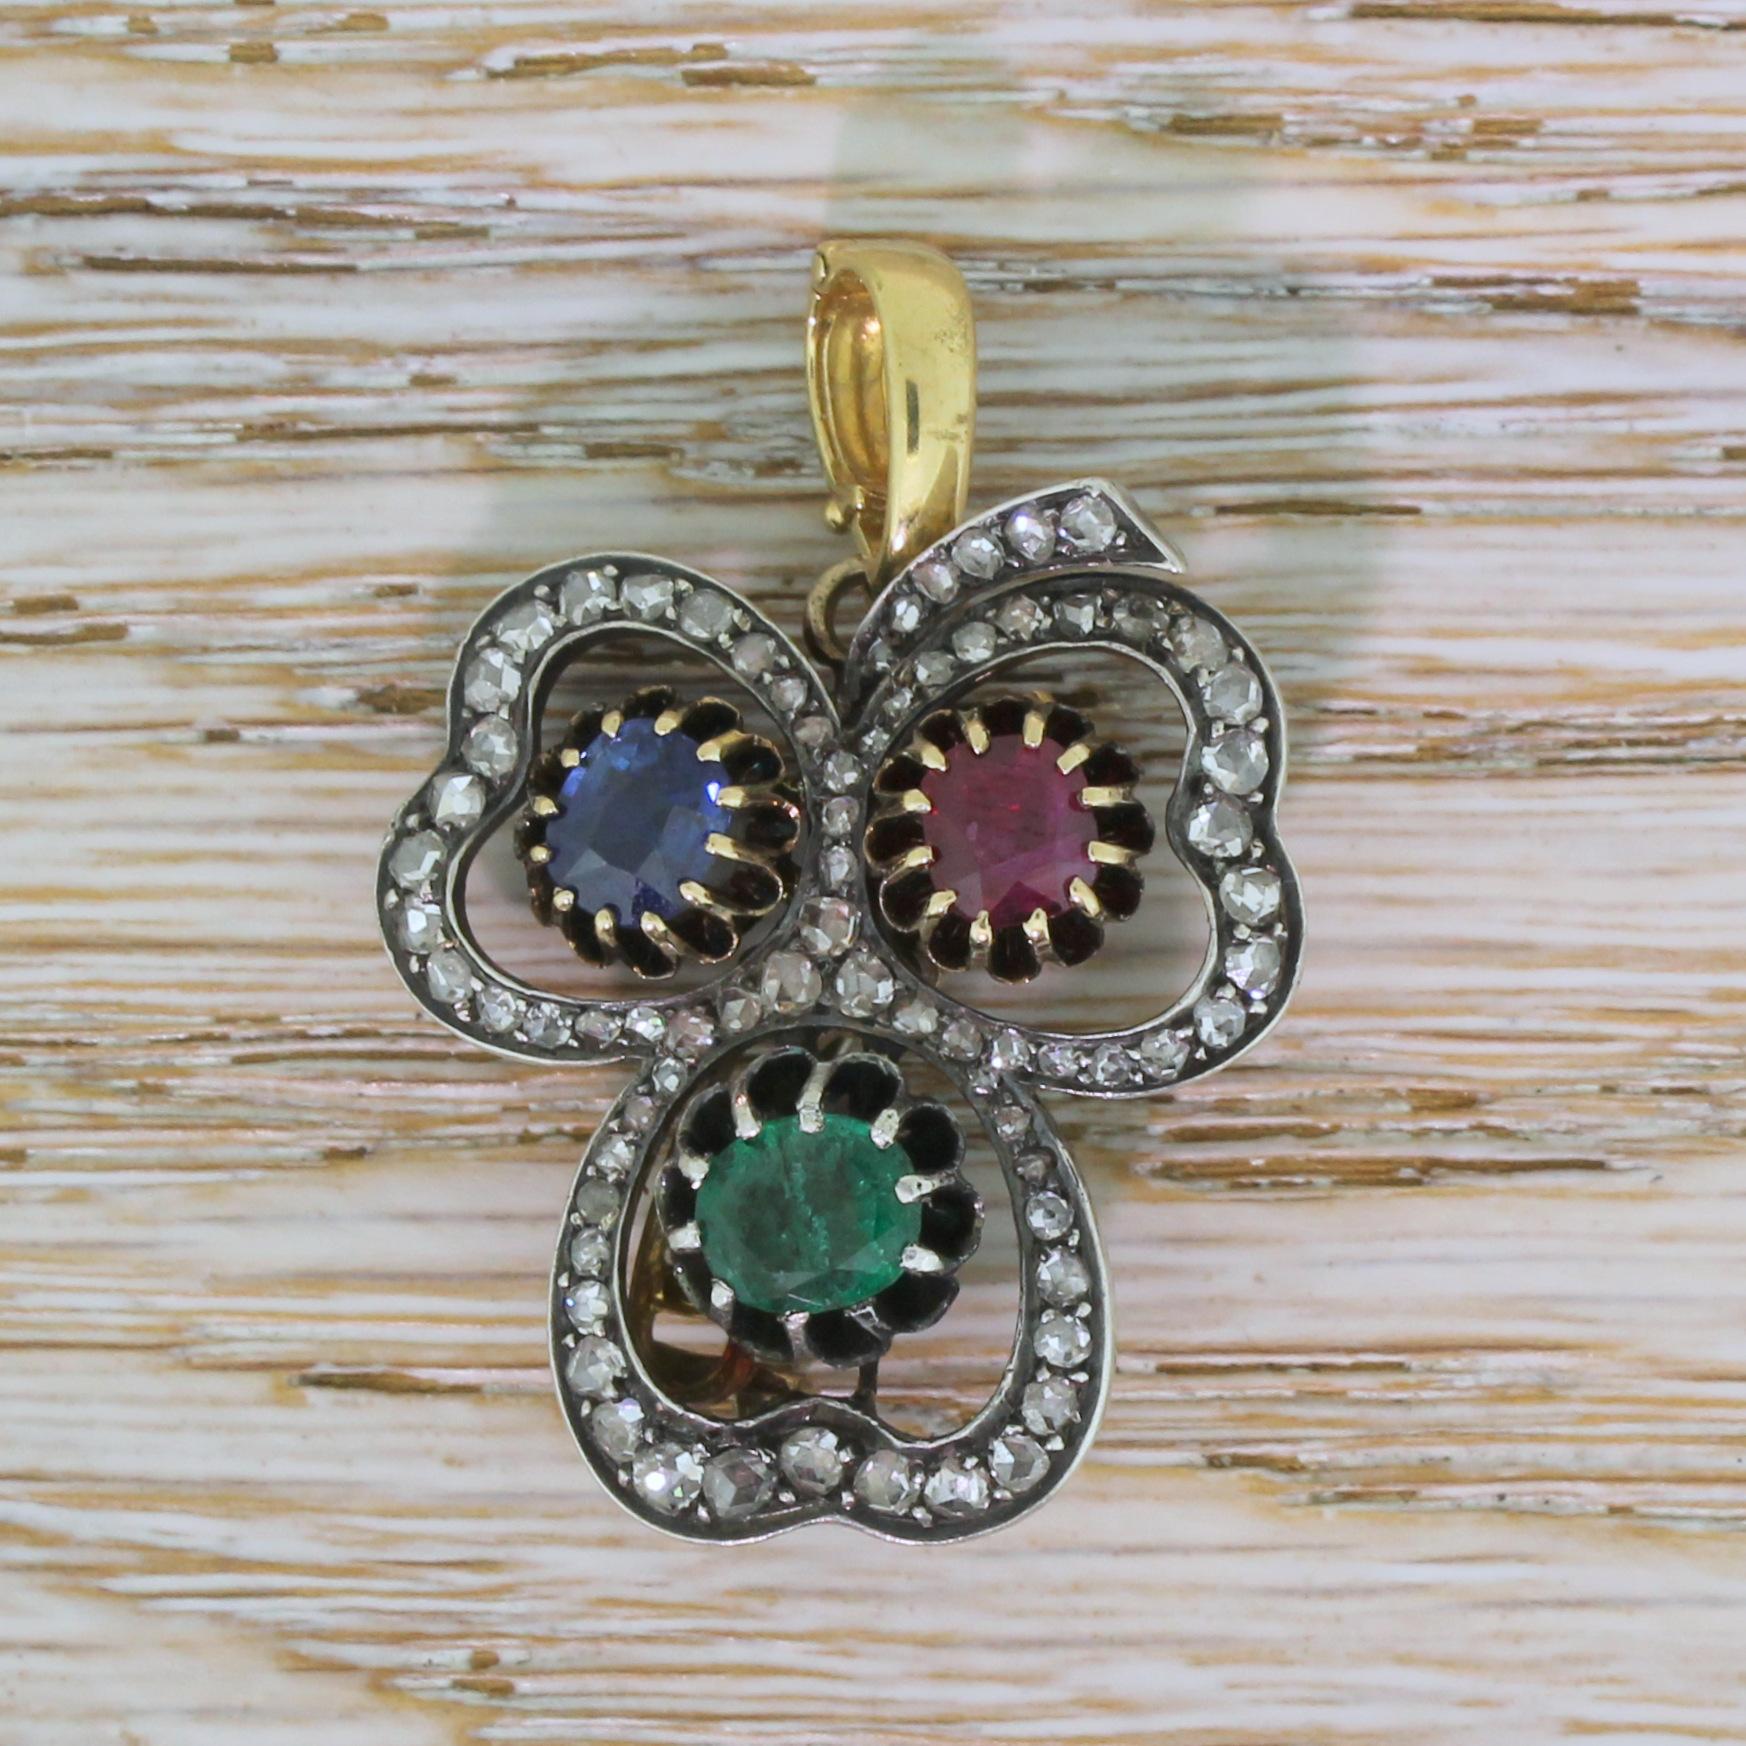 A top class example of Victorian jewellery. This highly adaptable piece can worn as a brooch or, with the removable pin unscrewed, as a pendant. Each of the three leaves is set with a precious gem; an emerald, a ruby and a sapphire. Seventy-one rose